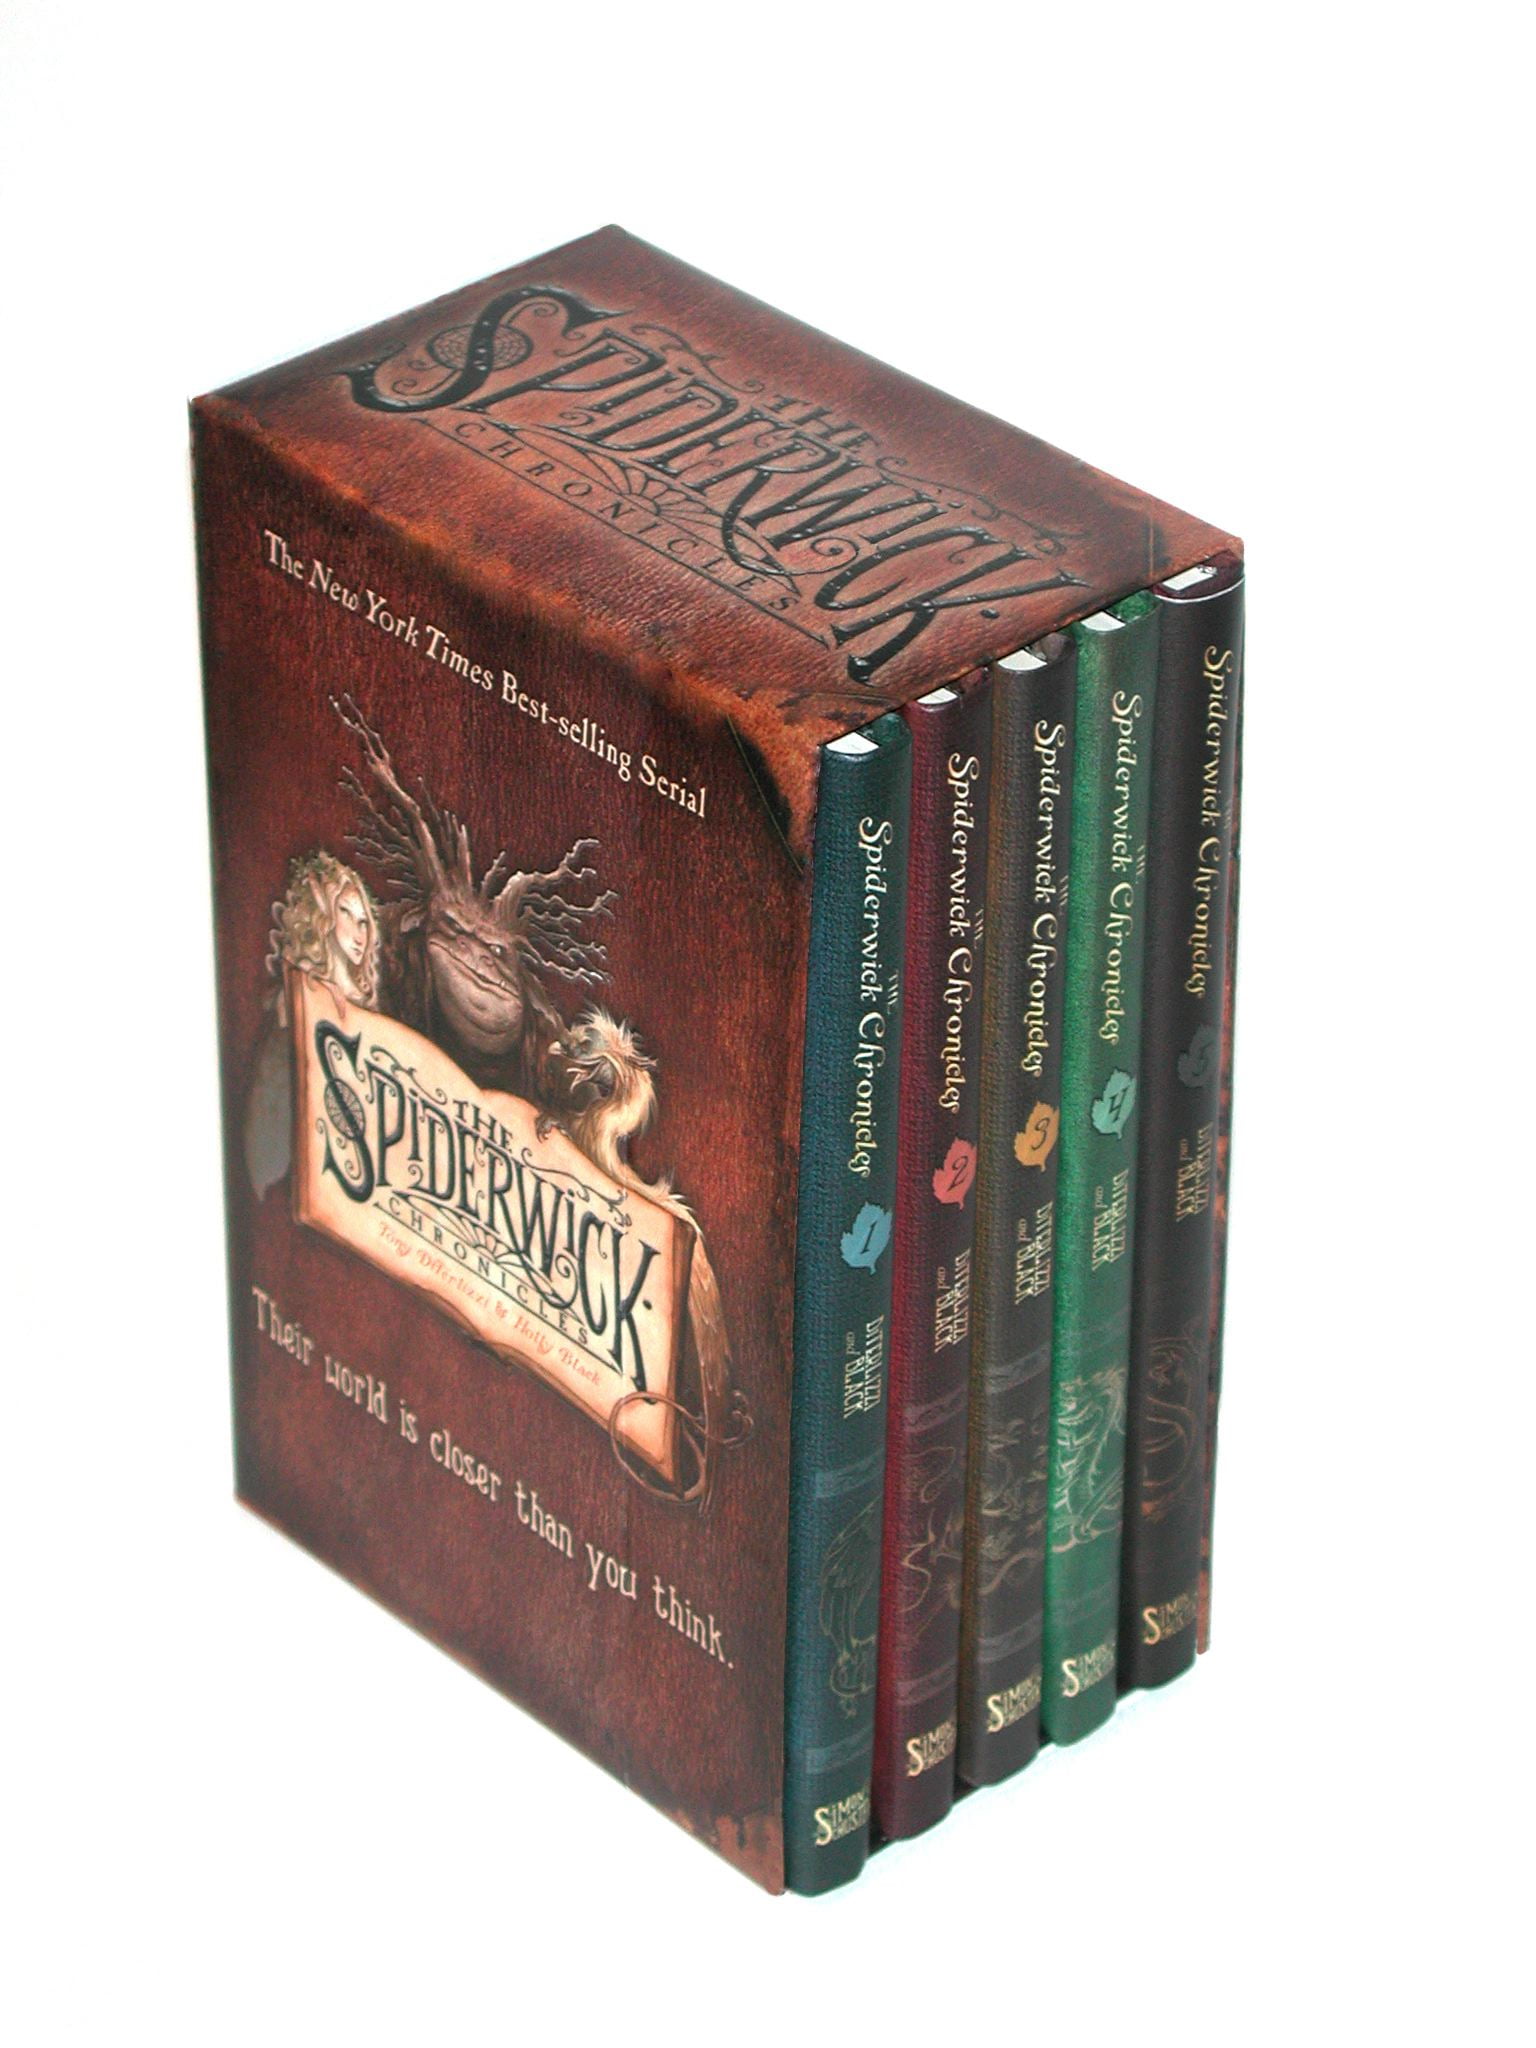 Spiderwick Chronicles The Spiderwick Chronicles (Boxed Set) The